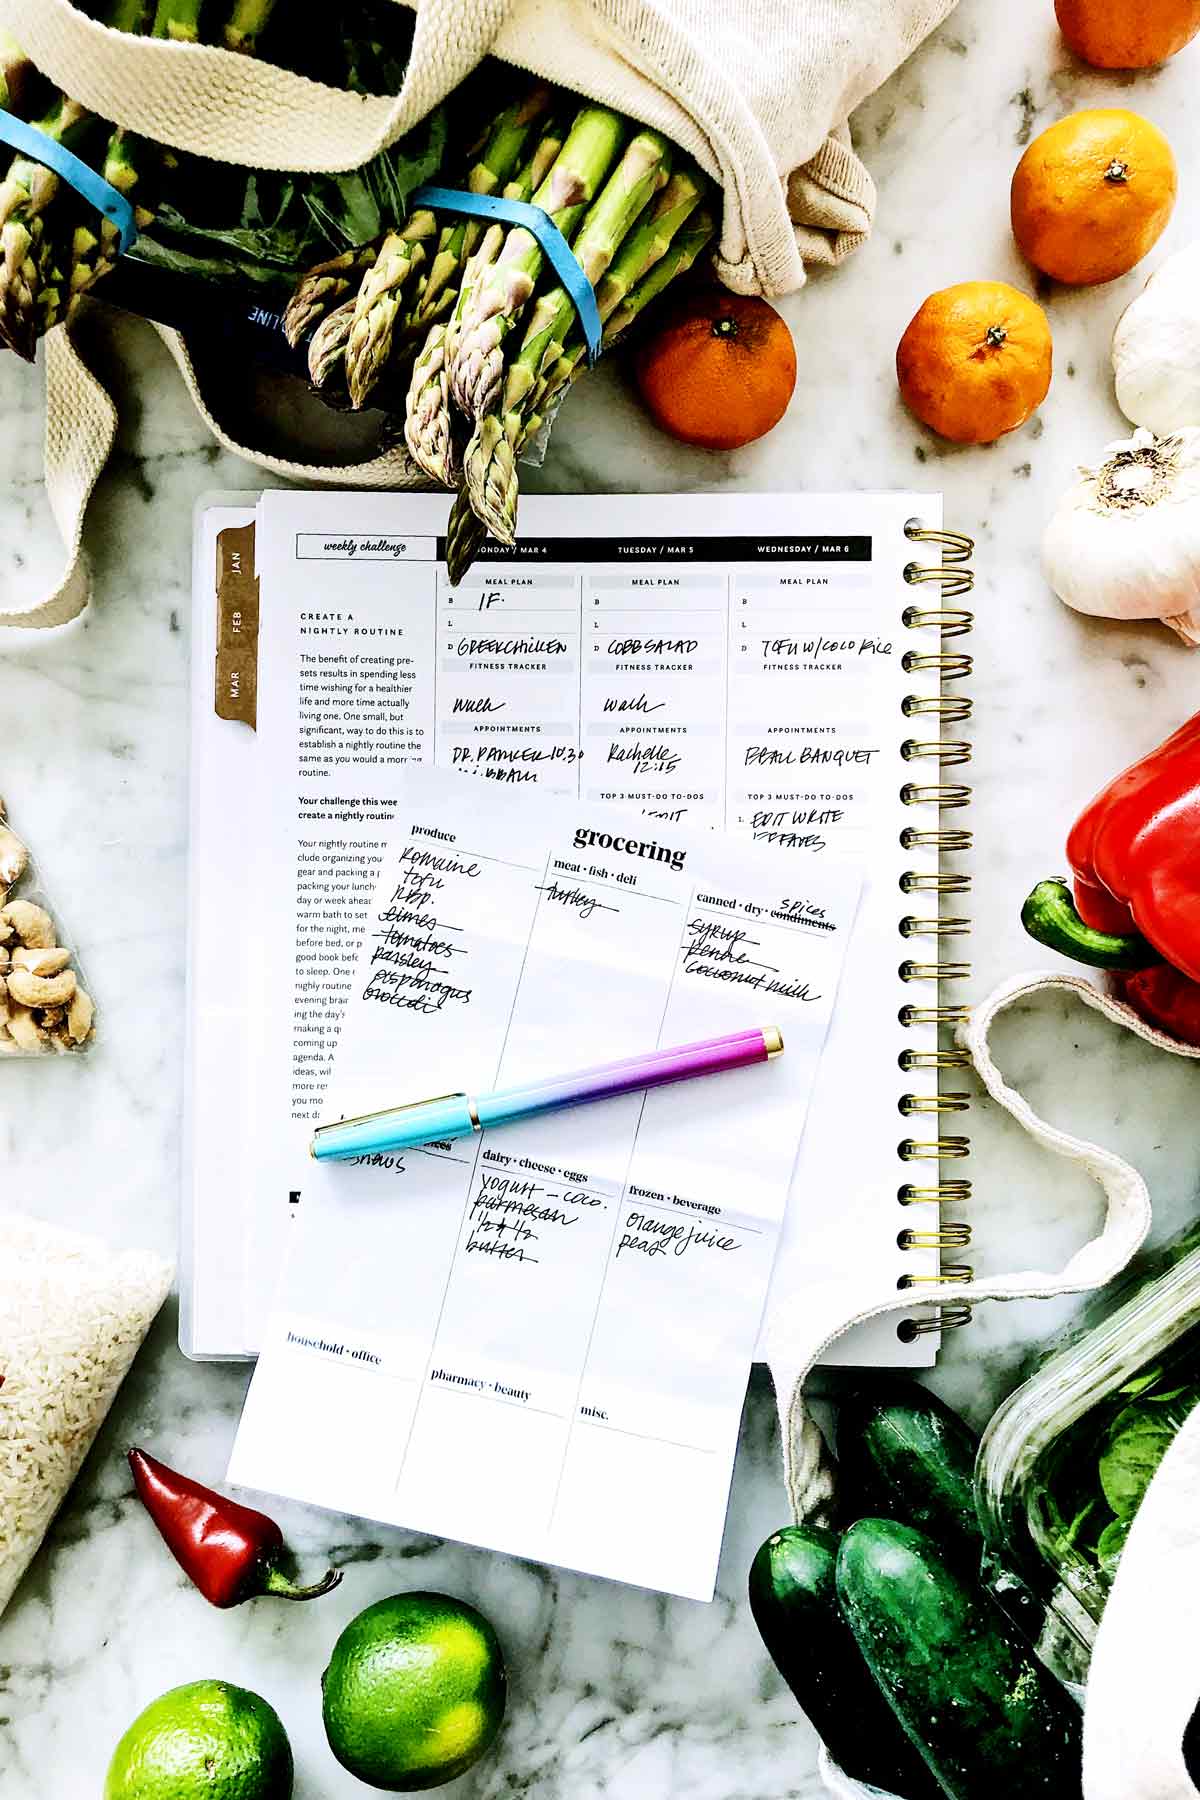 19 Ways to Save More Money at the Grocery Store - foodiecrush .com